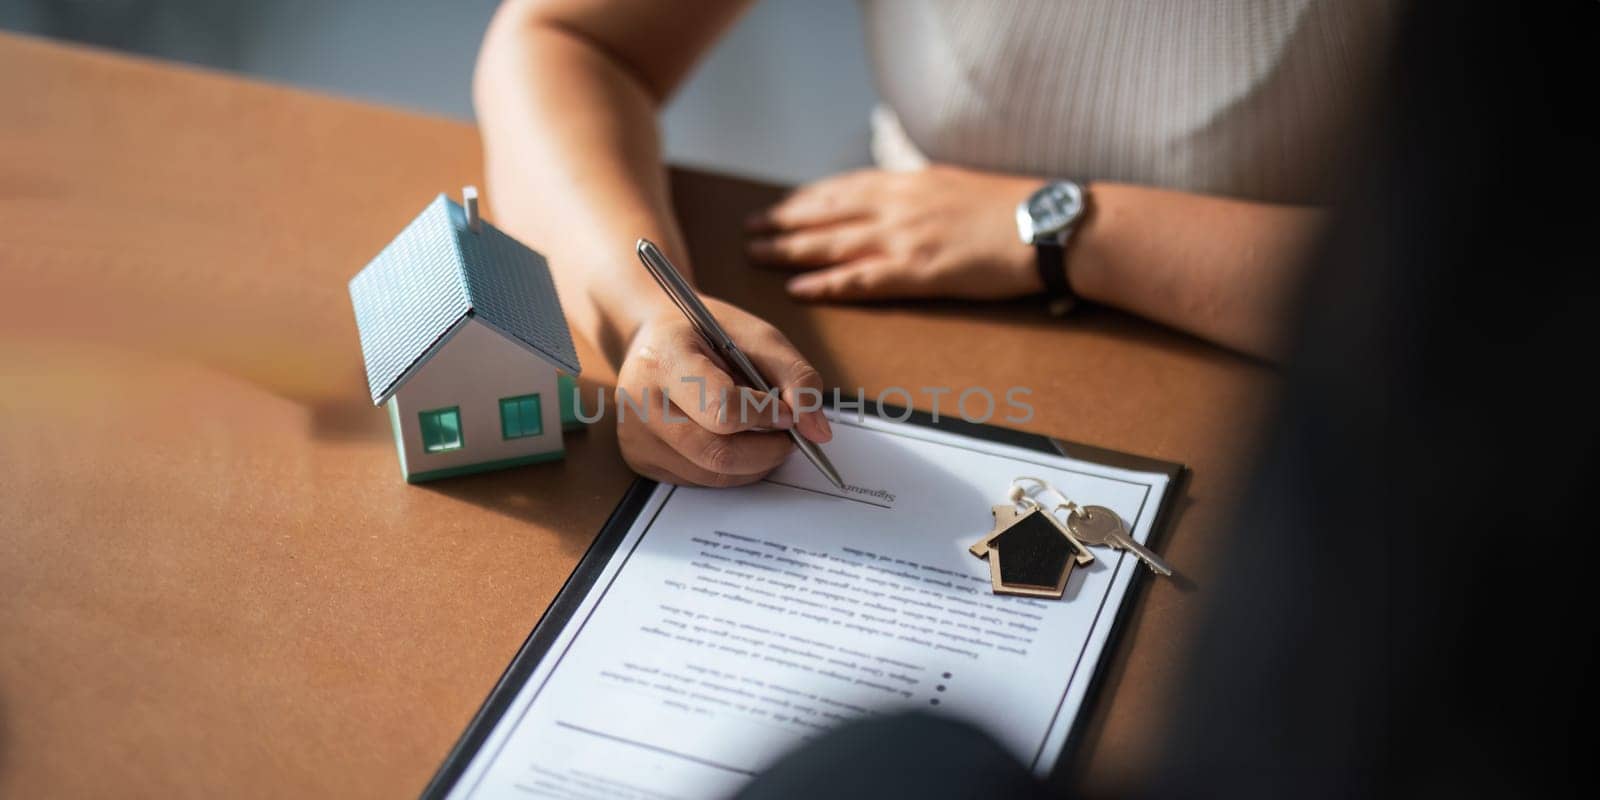 Real estate agent to his discussion and consult about house contracts client after signing contract, concept for real estate, moving home or renting property by nateemee